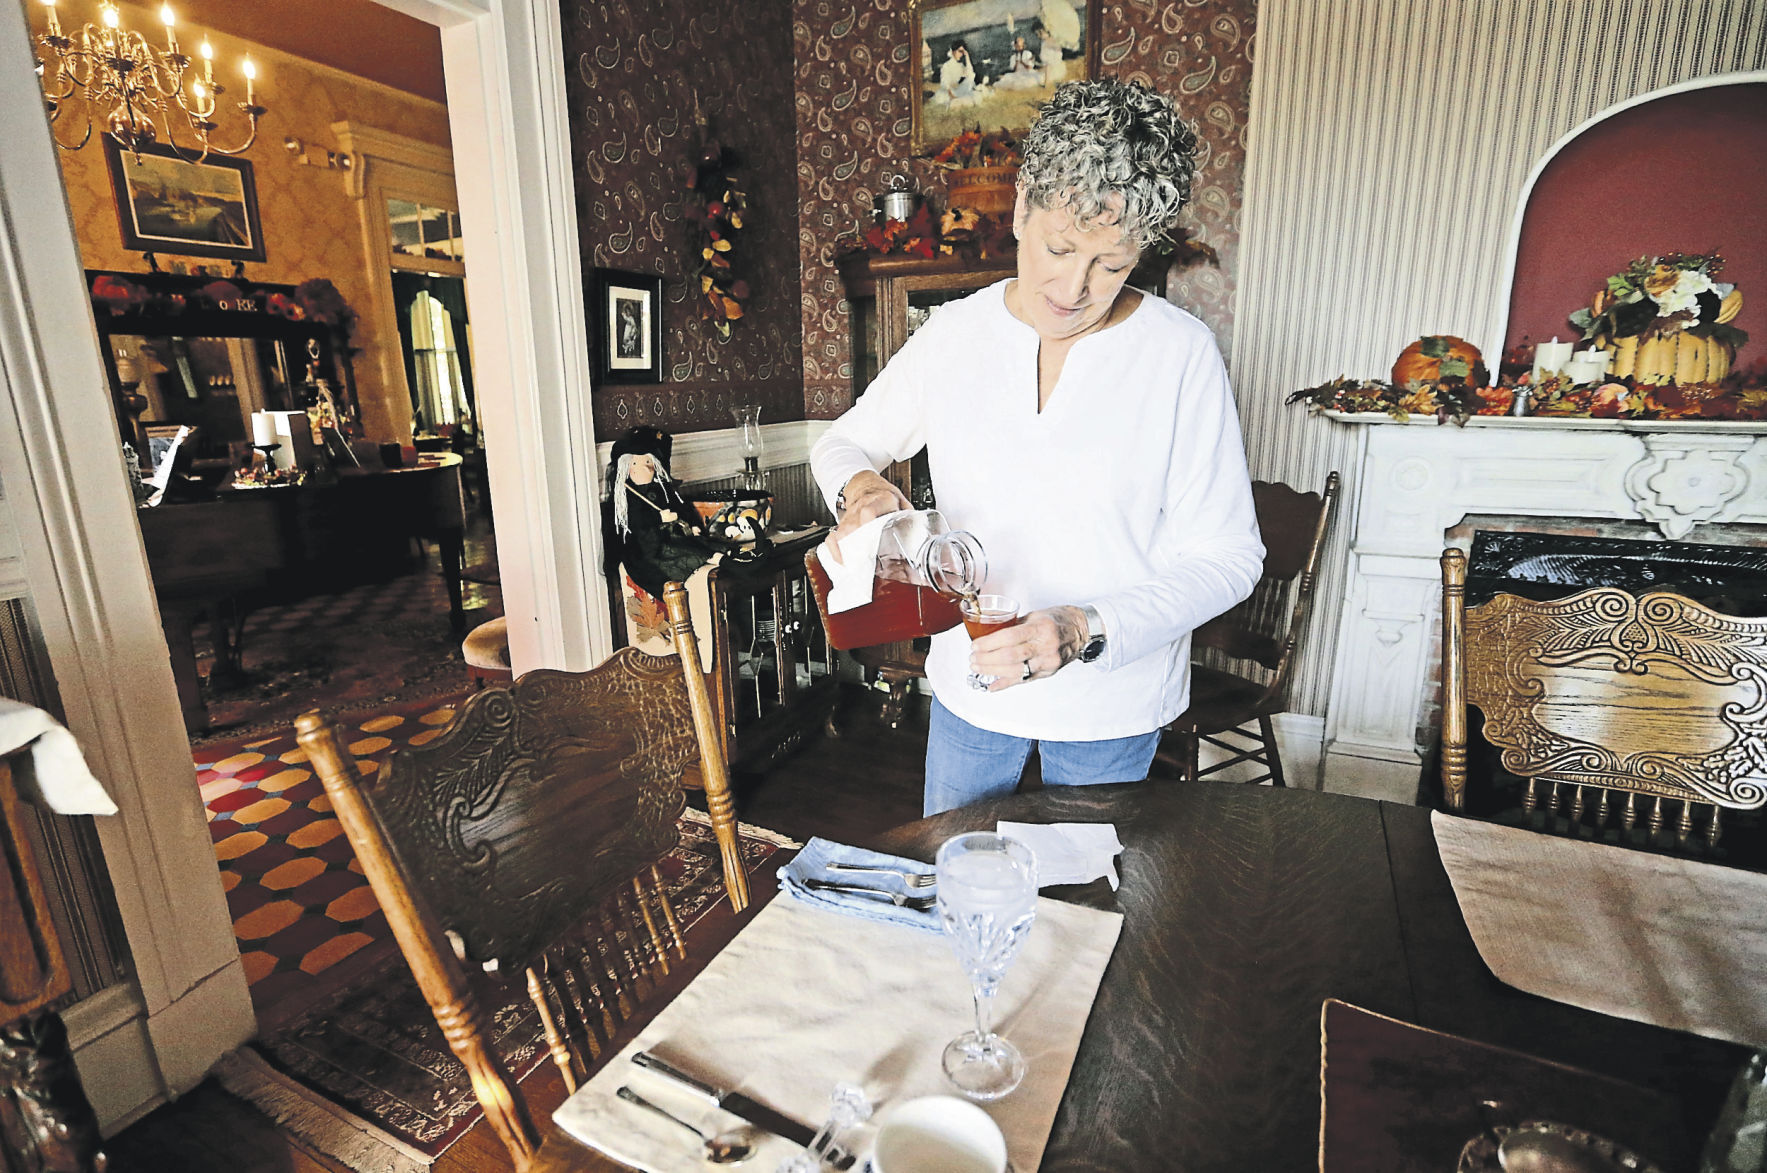 Owner Carol Gebelt pours a glass of juice while preparing breakfast for guests at The Steamboat House Bed and Breakfast in Galena, Ill.    PHOTO CREDIT: JESSICA REILLY